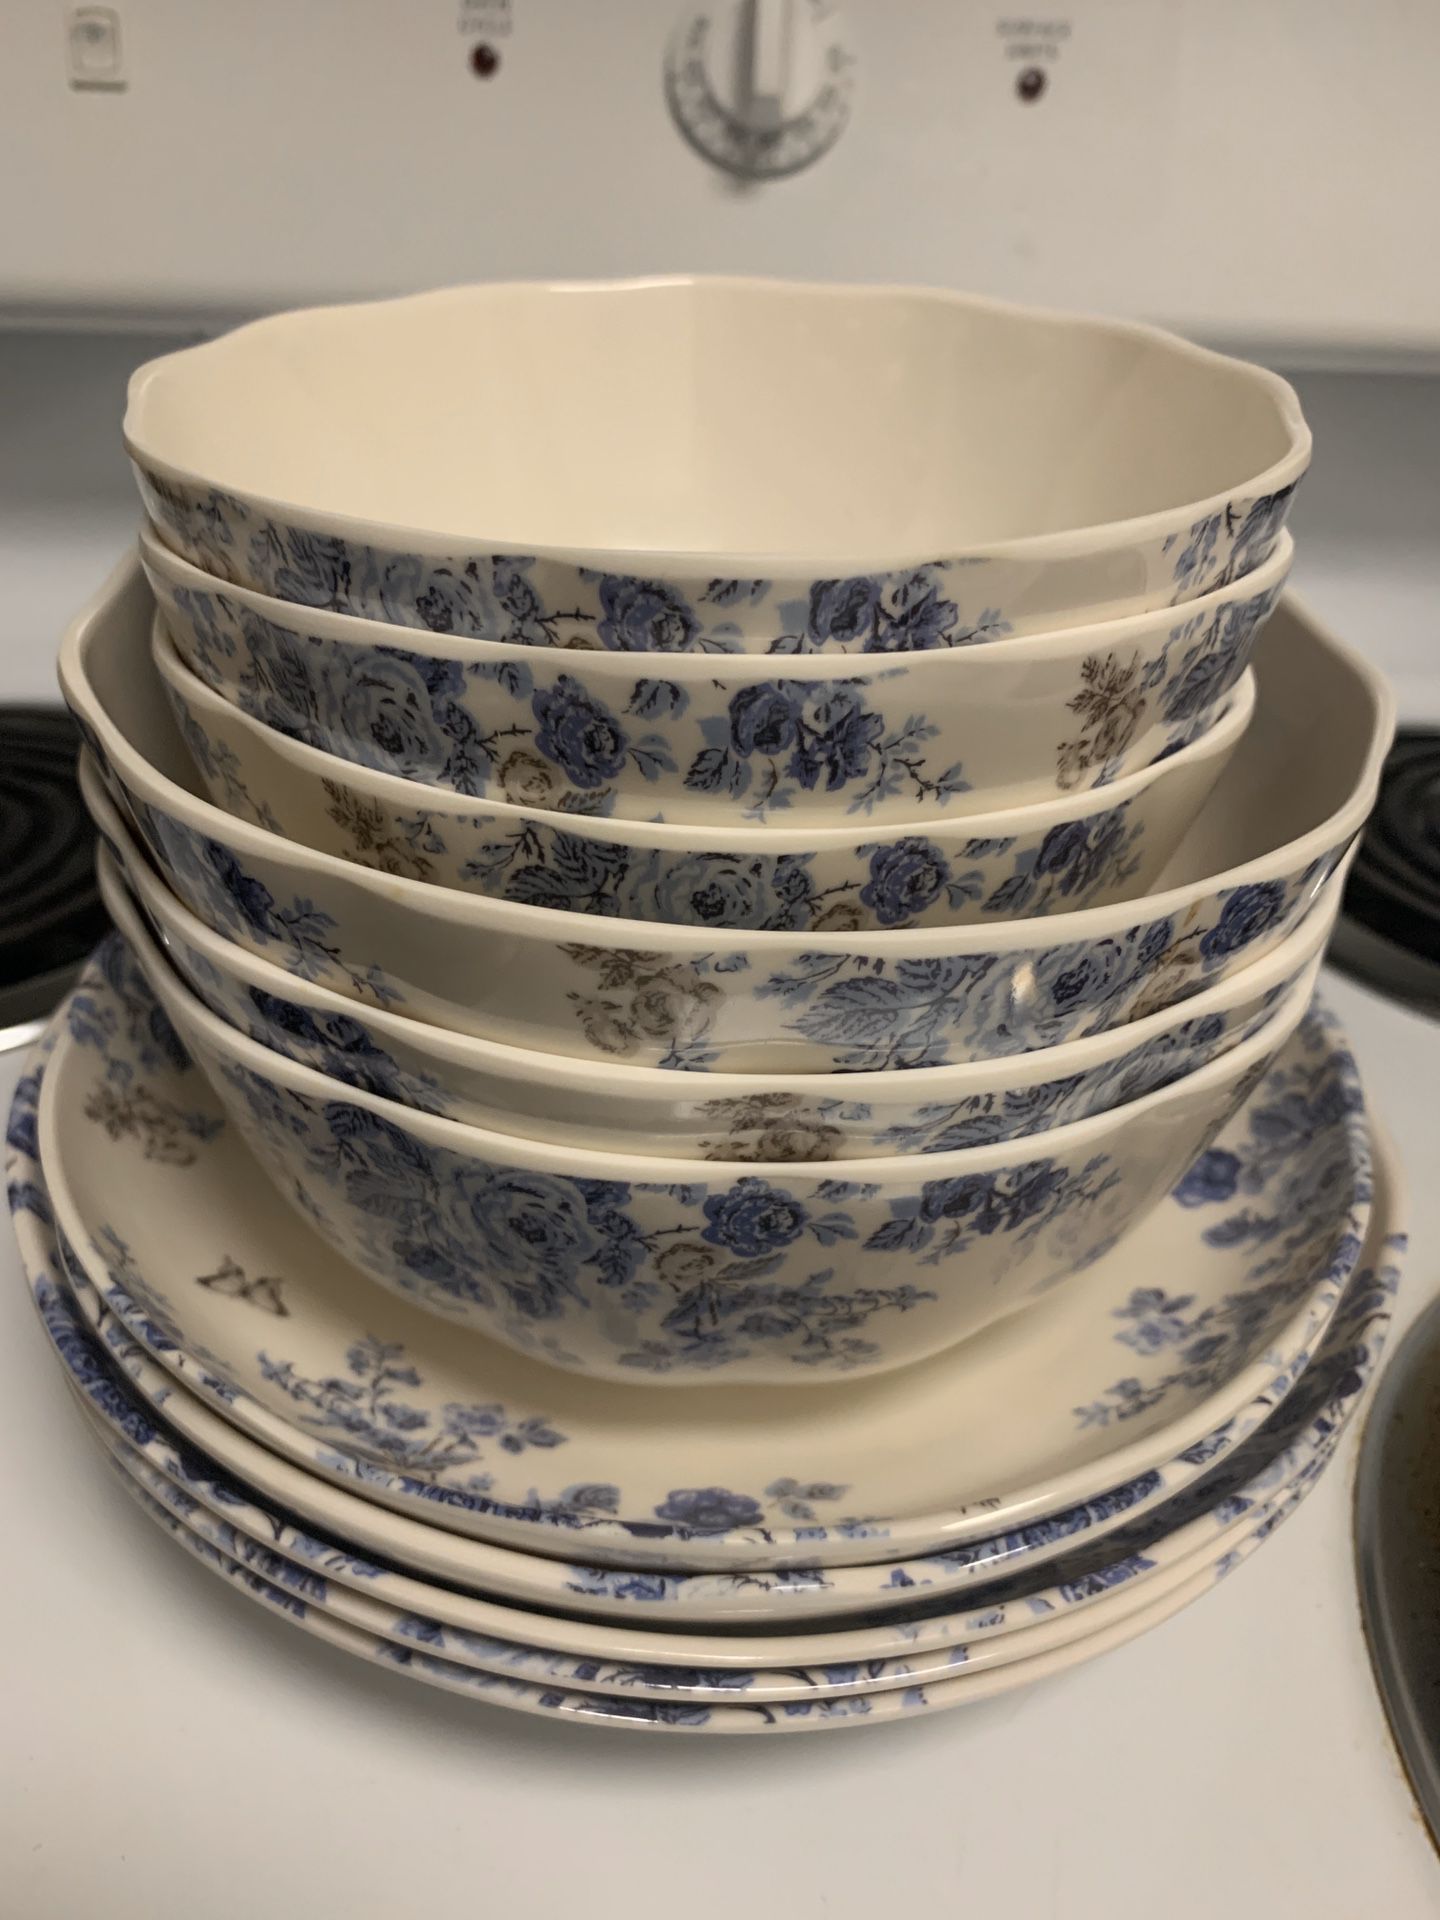 Plates and bowl